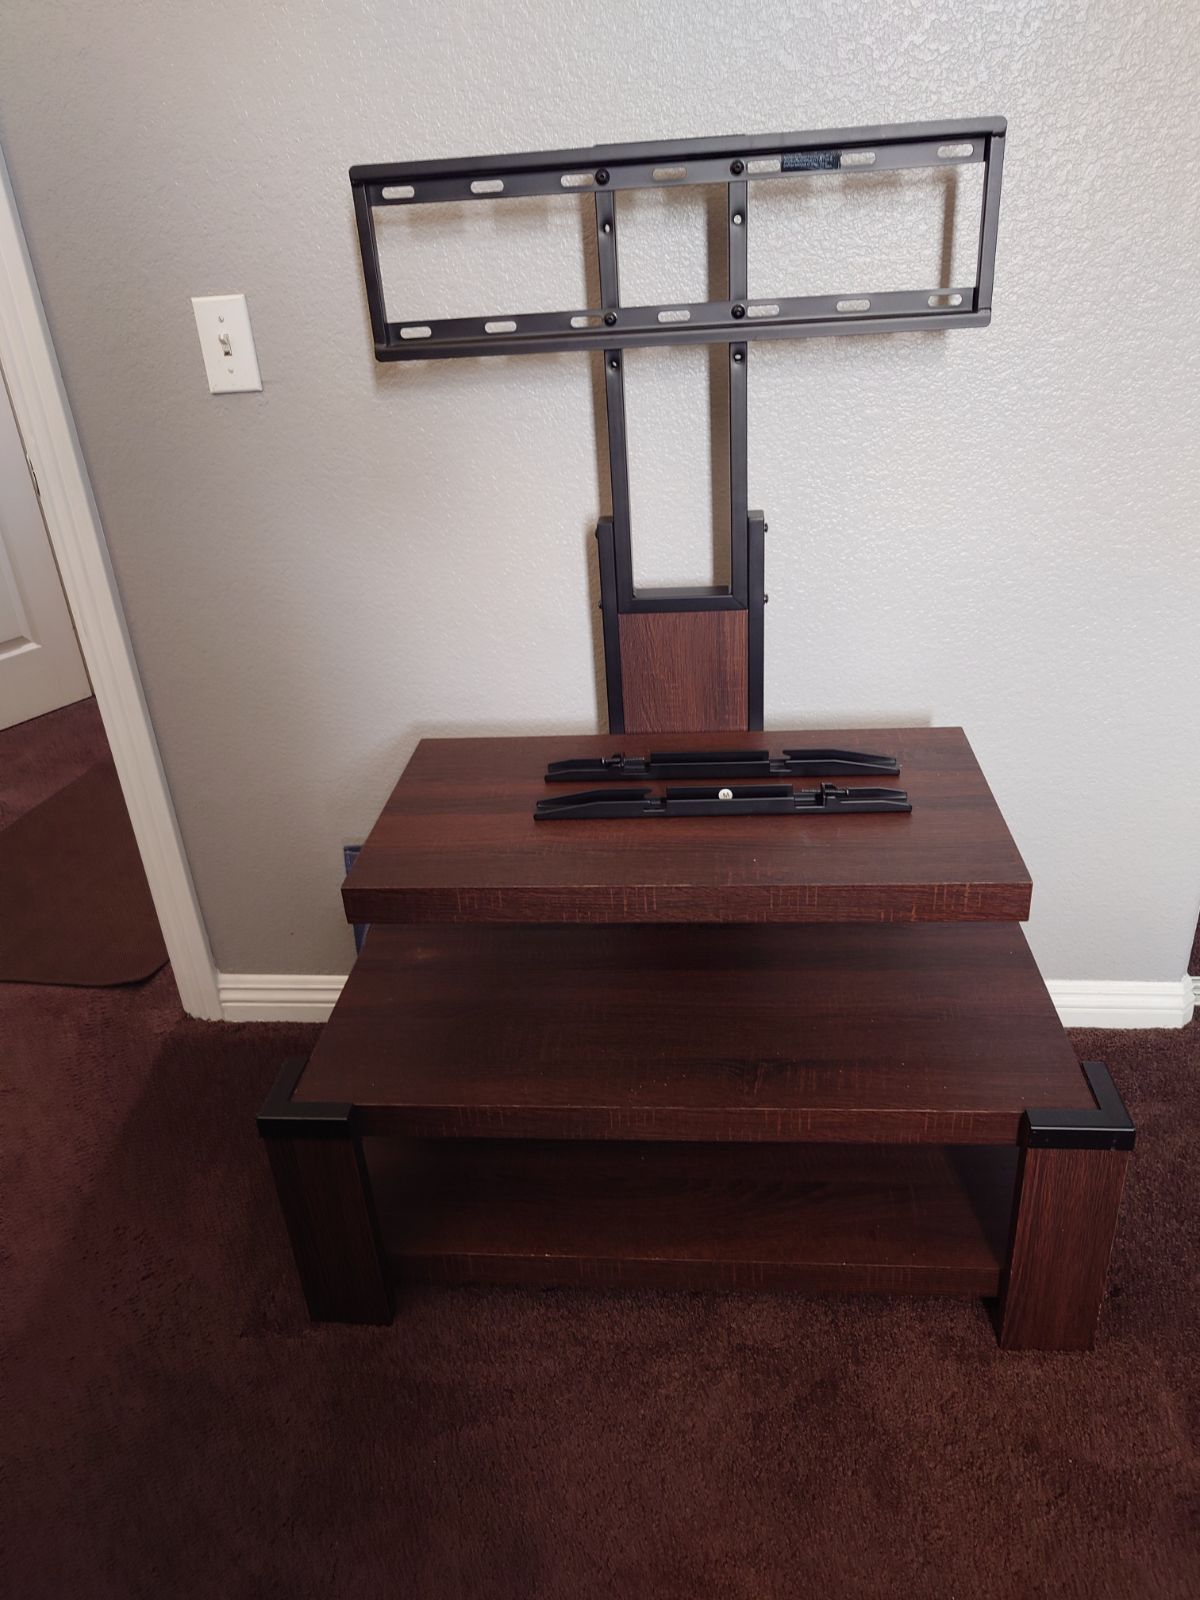 55 Inch Flat panel TV Stand